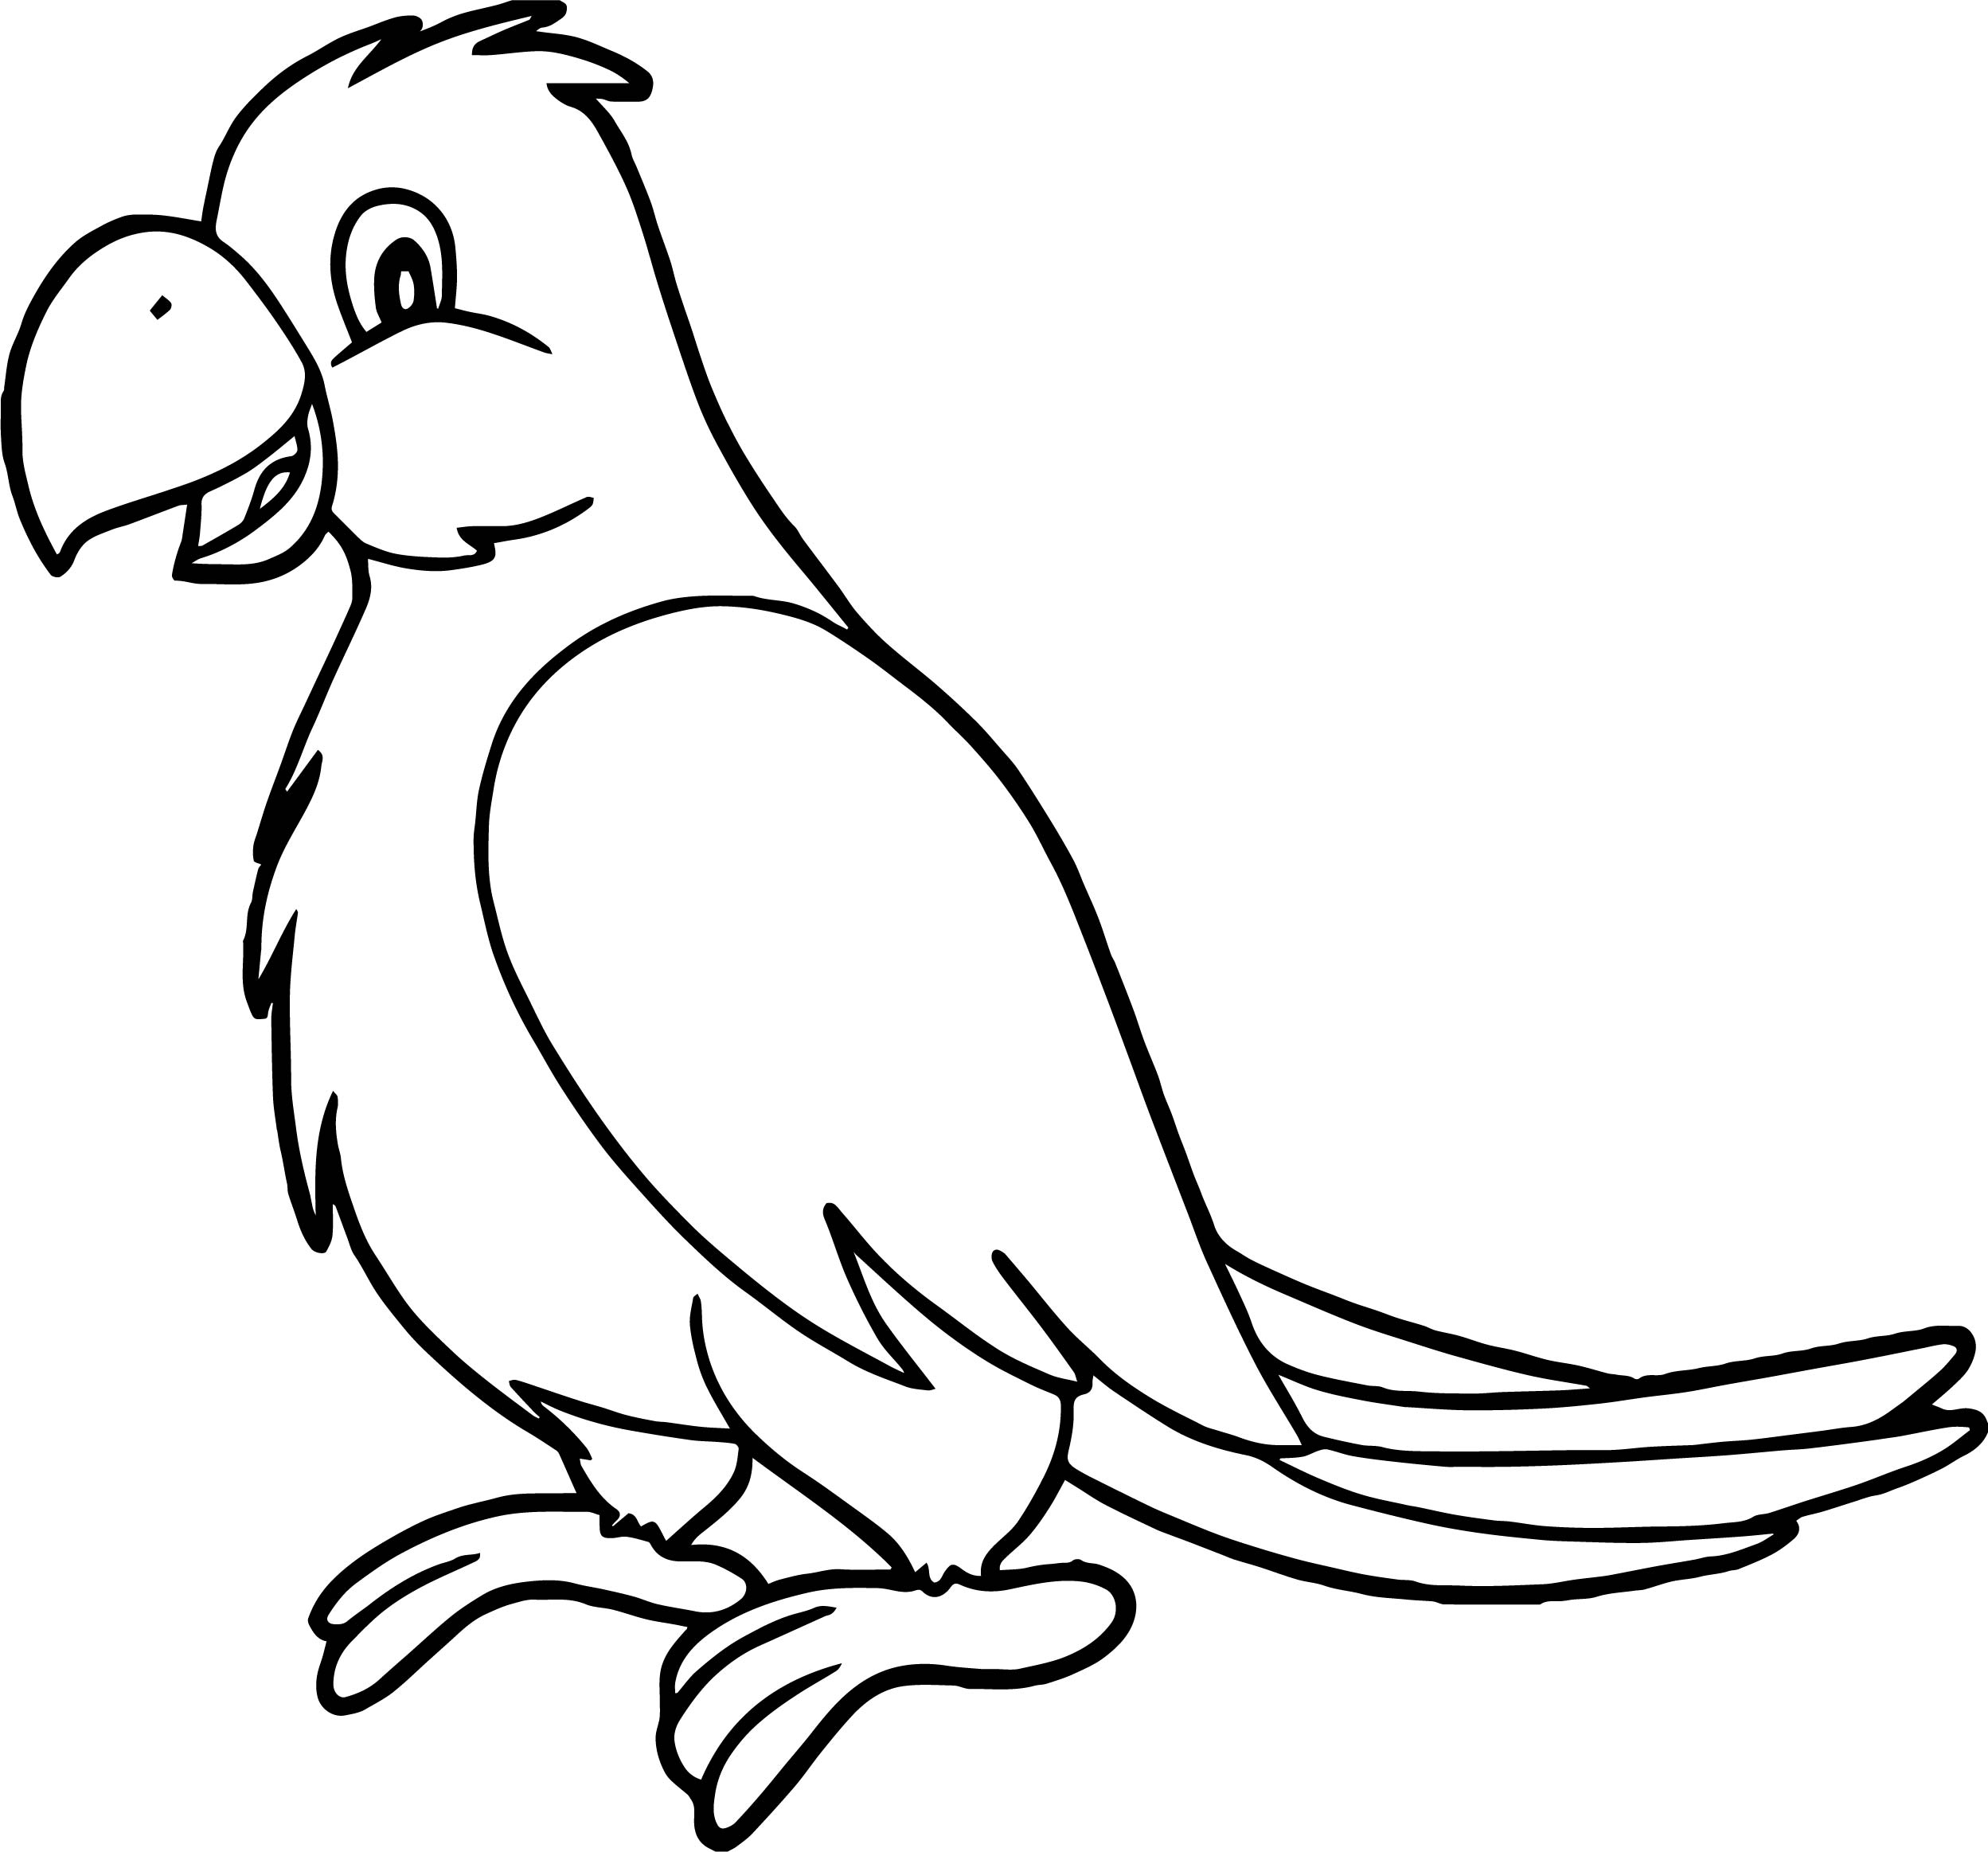 Parrot Drawing Images at GetDrawings Free download